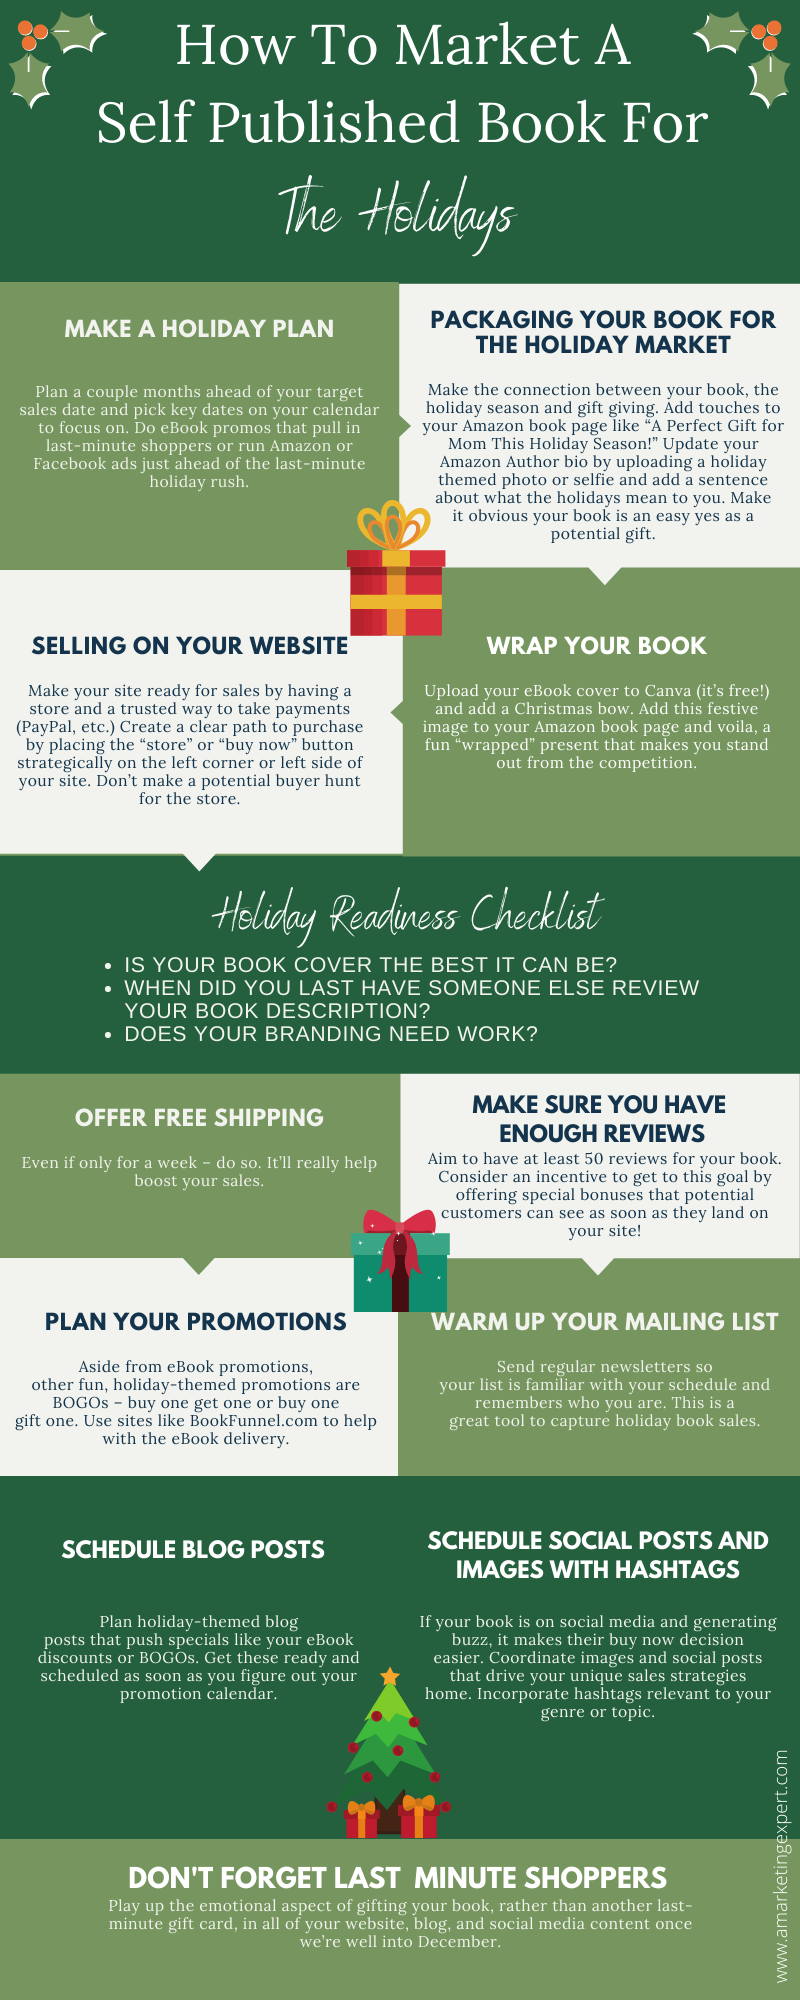 How to Promote a Self Published Book for the Holidays